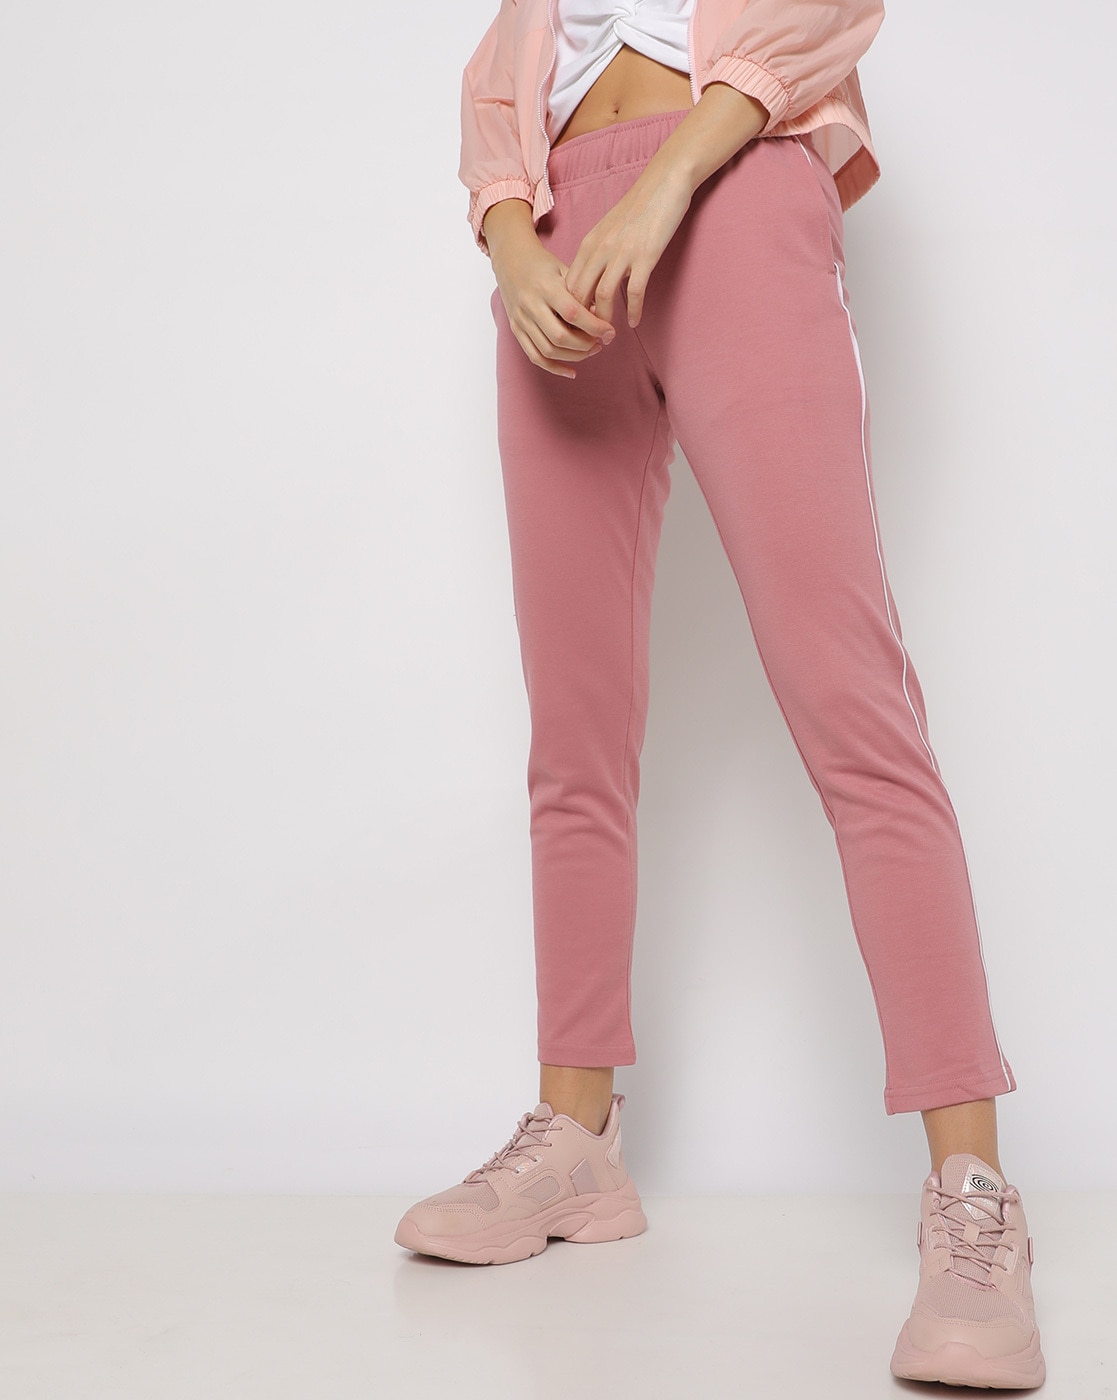 Buy C9 Cotton Track pants  Pink at Rs542 online  Activewear online